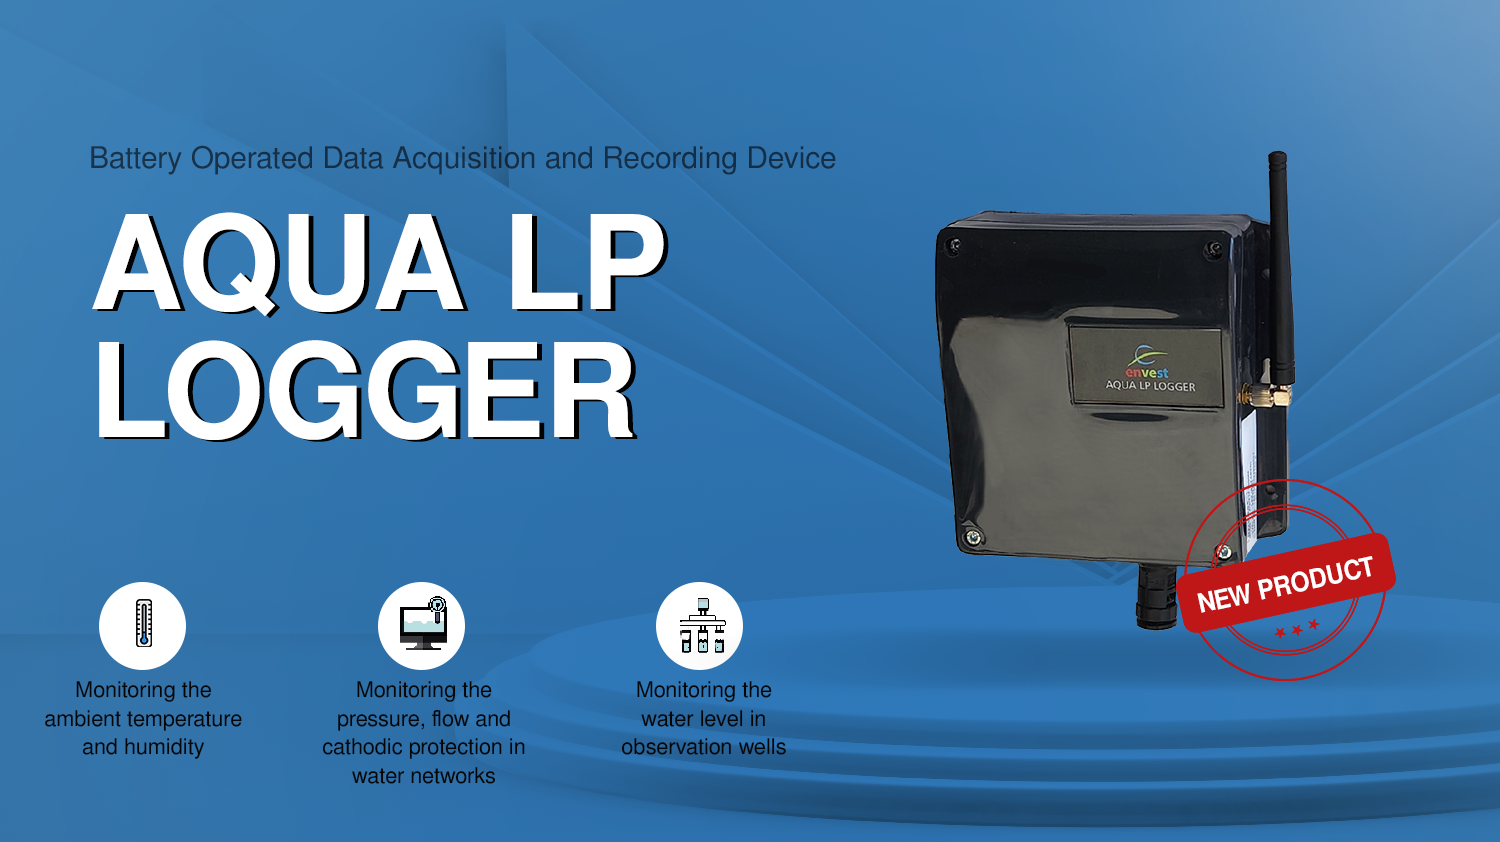 Take a Closer Look at Our New Device AQUA CNT LP LOGGER.